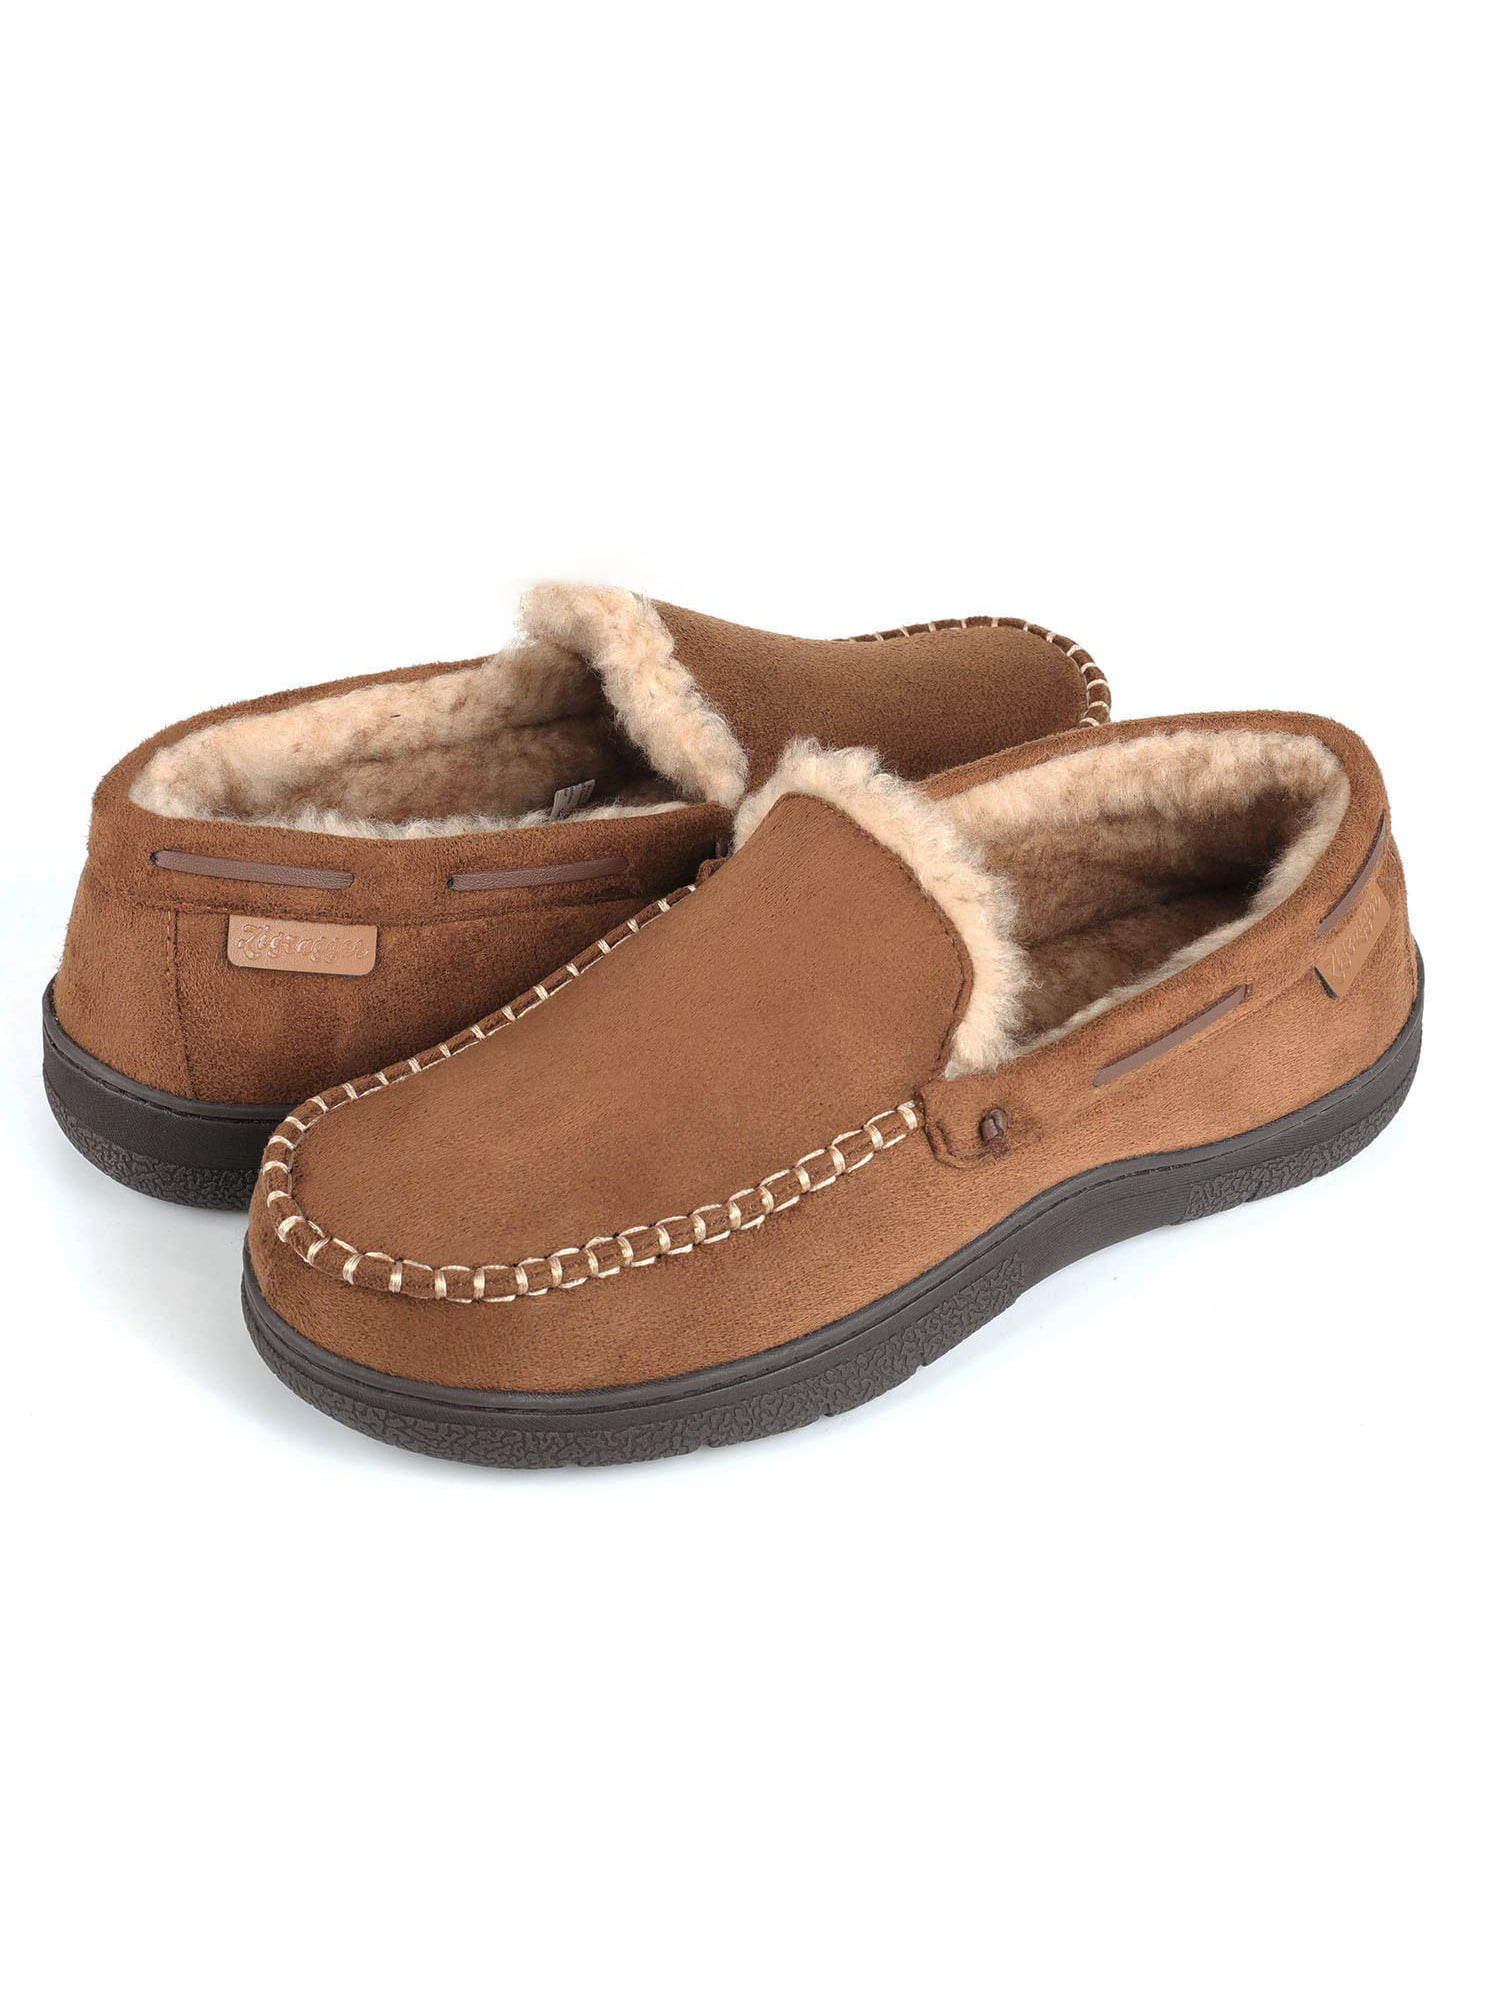 Zigzagger - Men's Microsuede Moccasin Slippers Memory Foam House Shoes